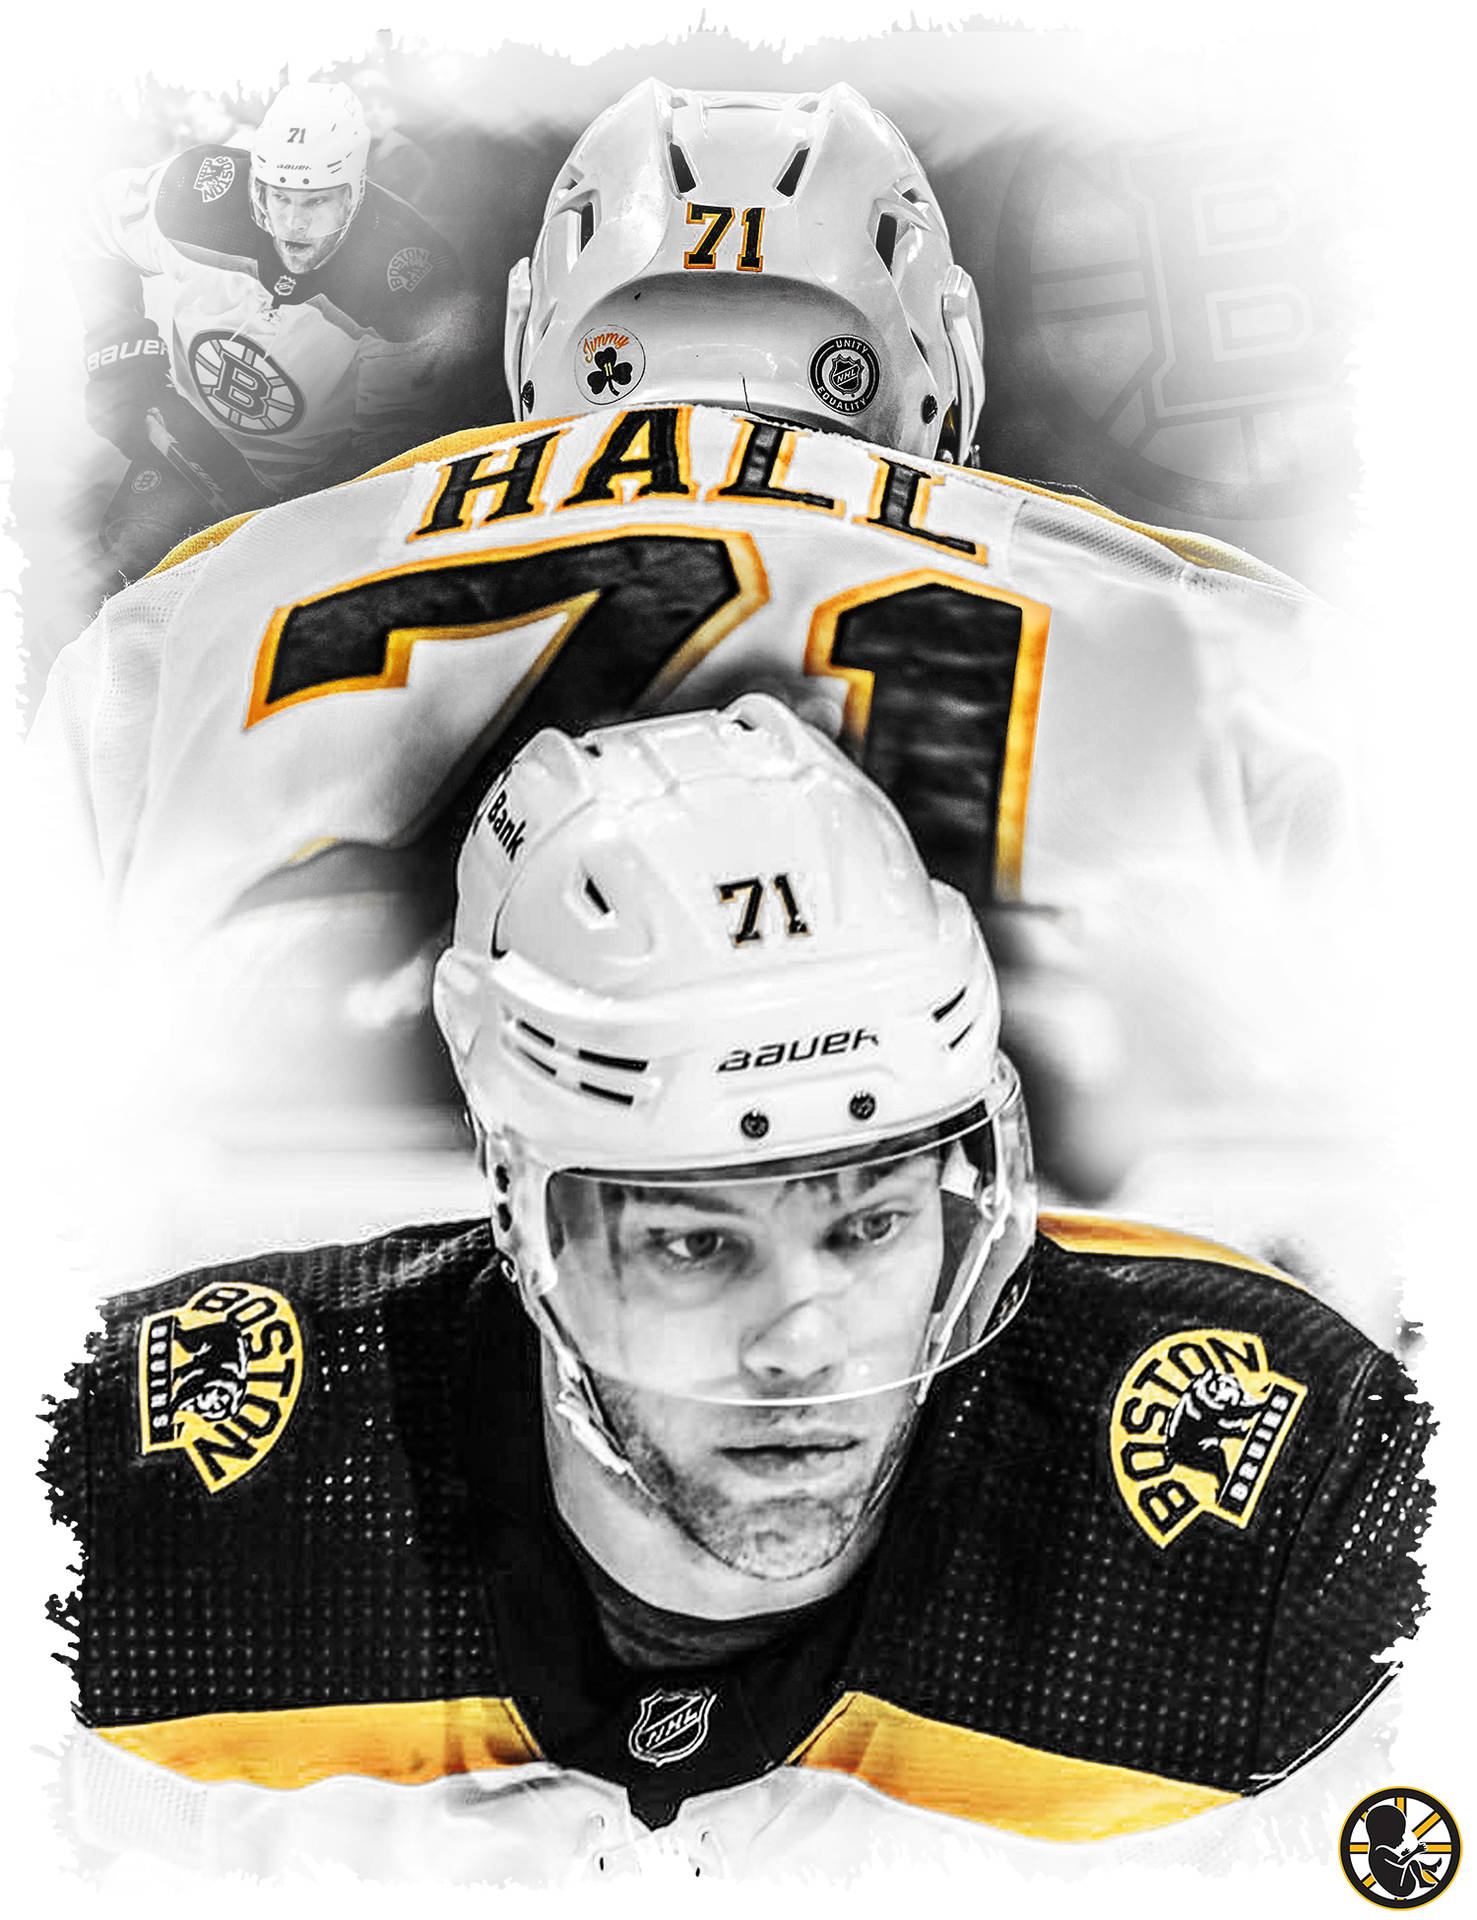 Boston Bruins iconic player, Taylor Hall in action. Wallpaper